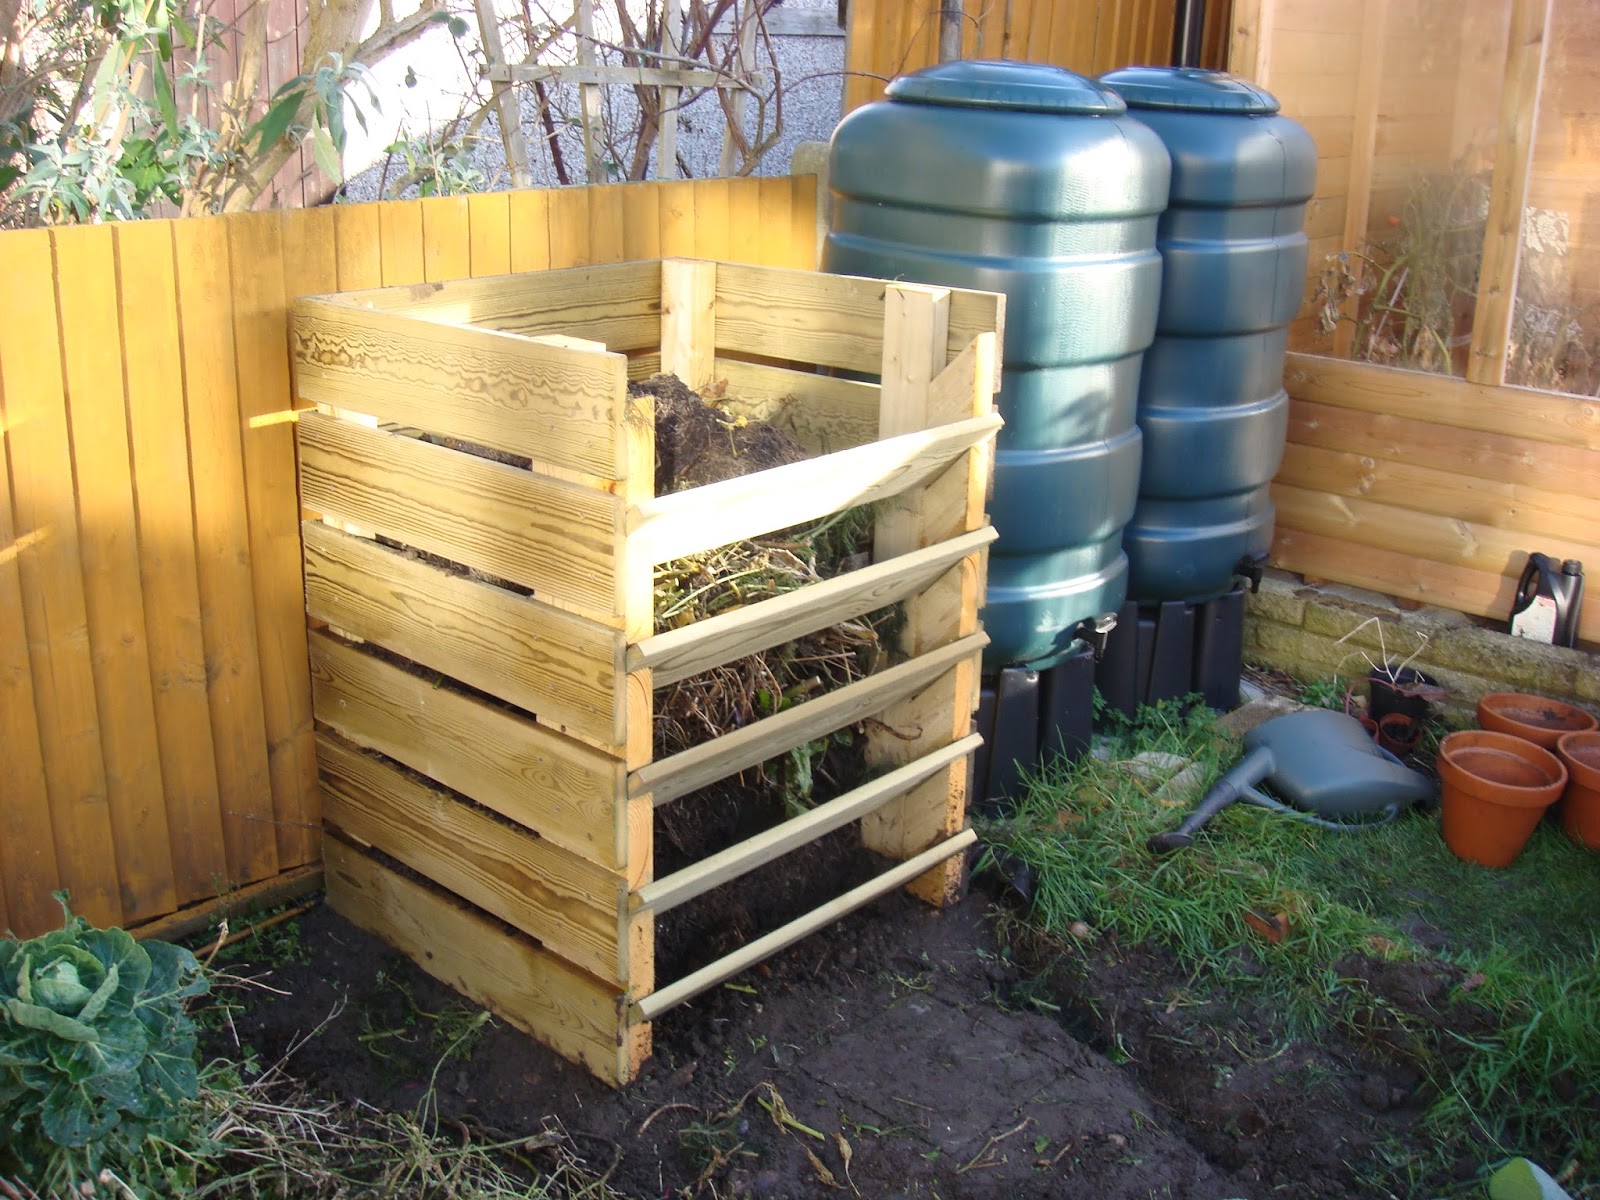 Veg patch from scratch: How to make your own wooden ...